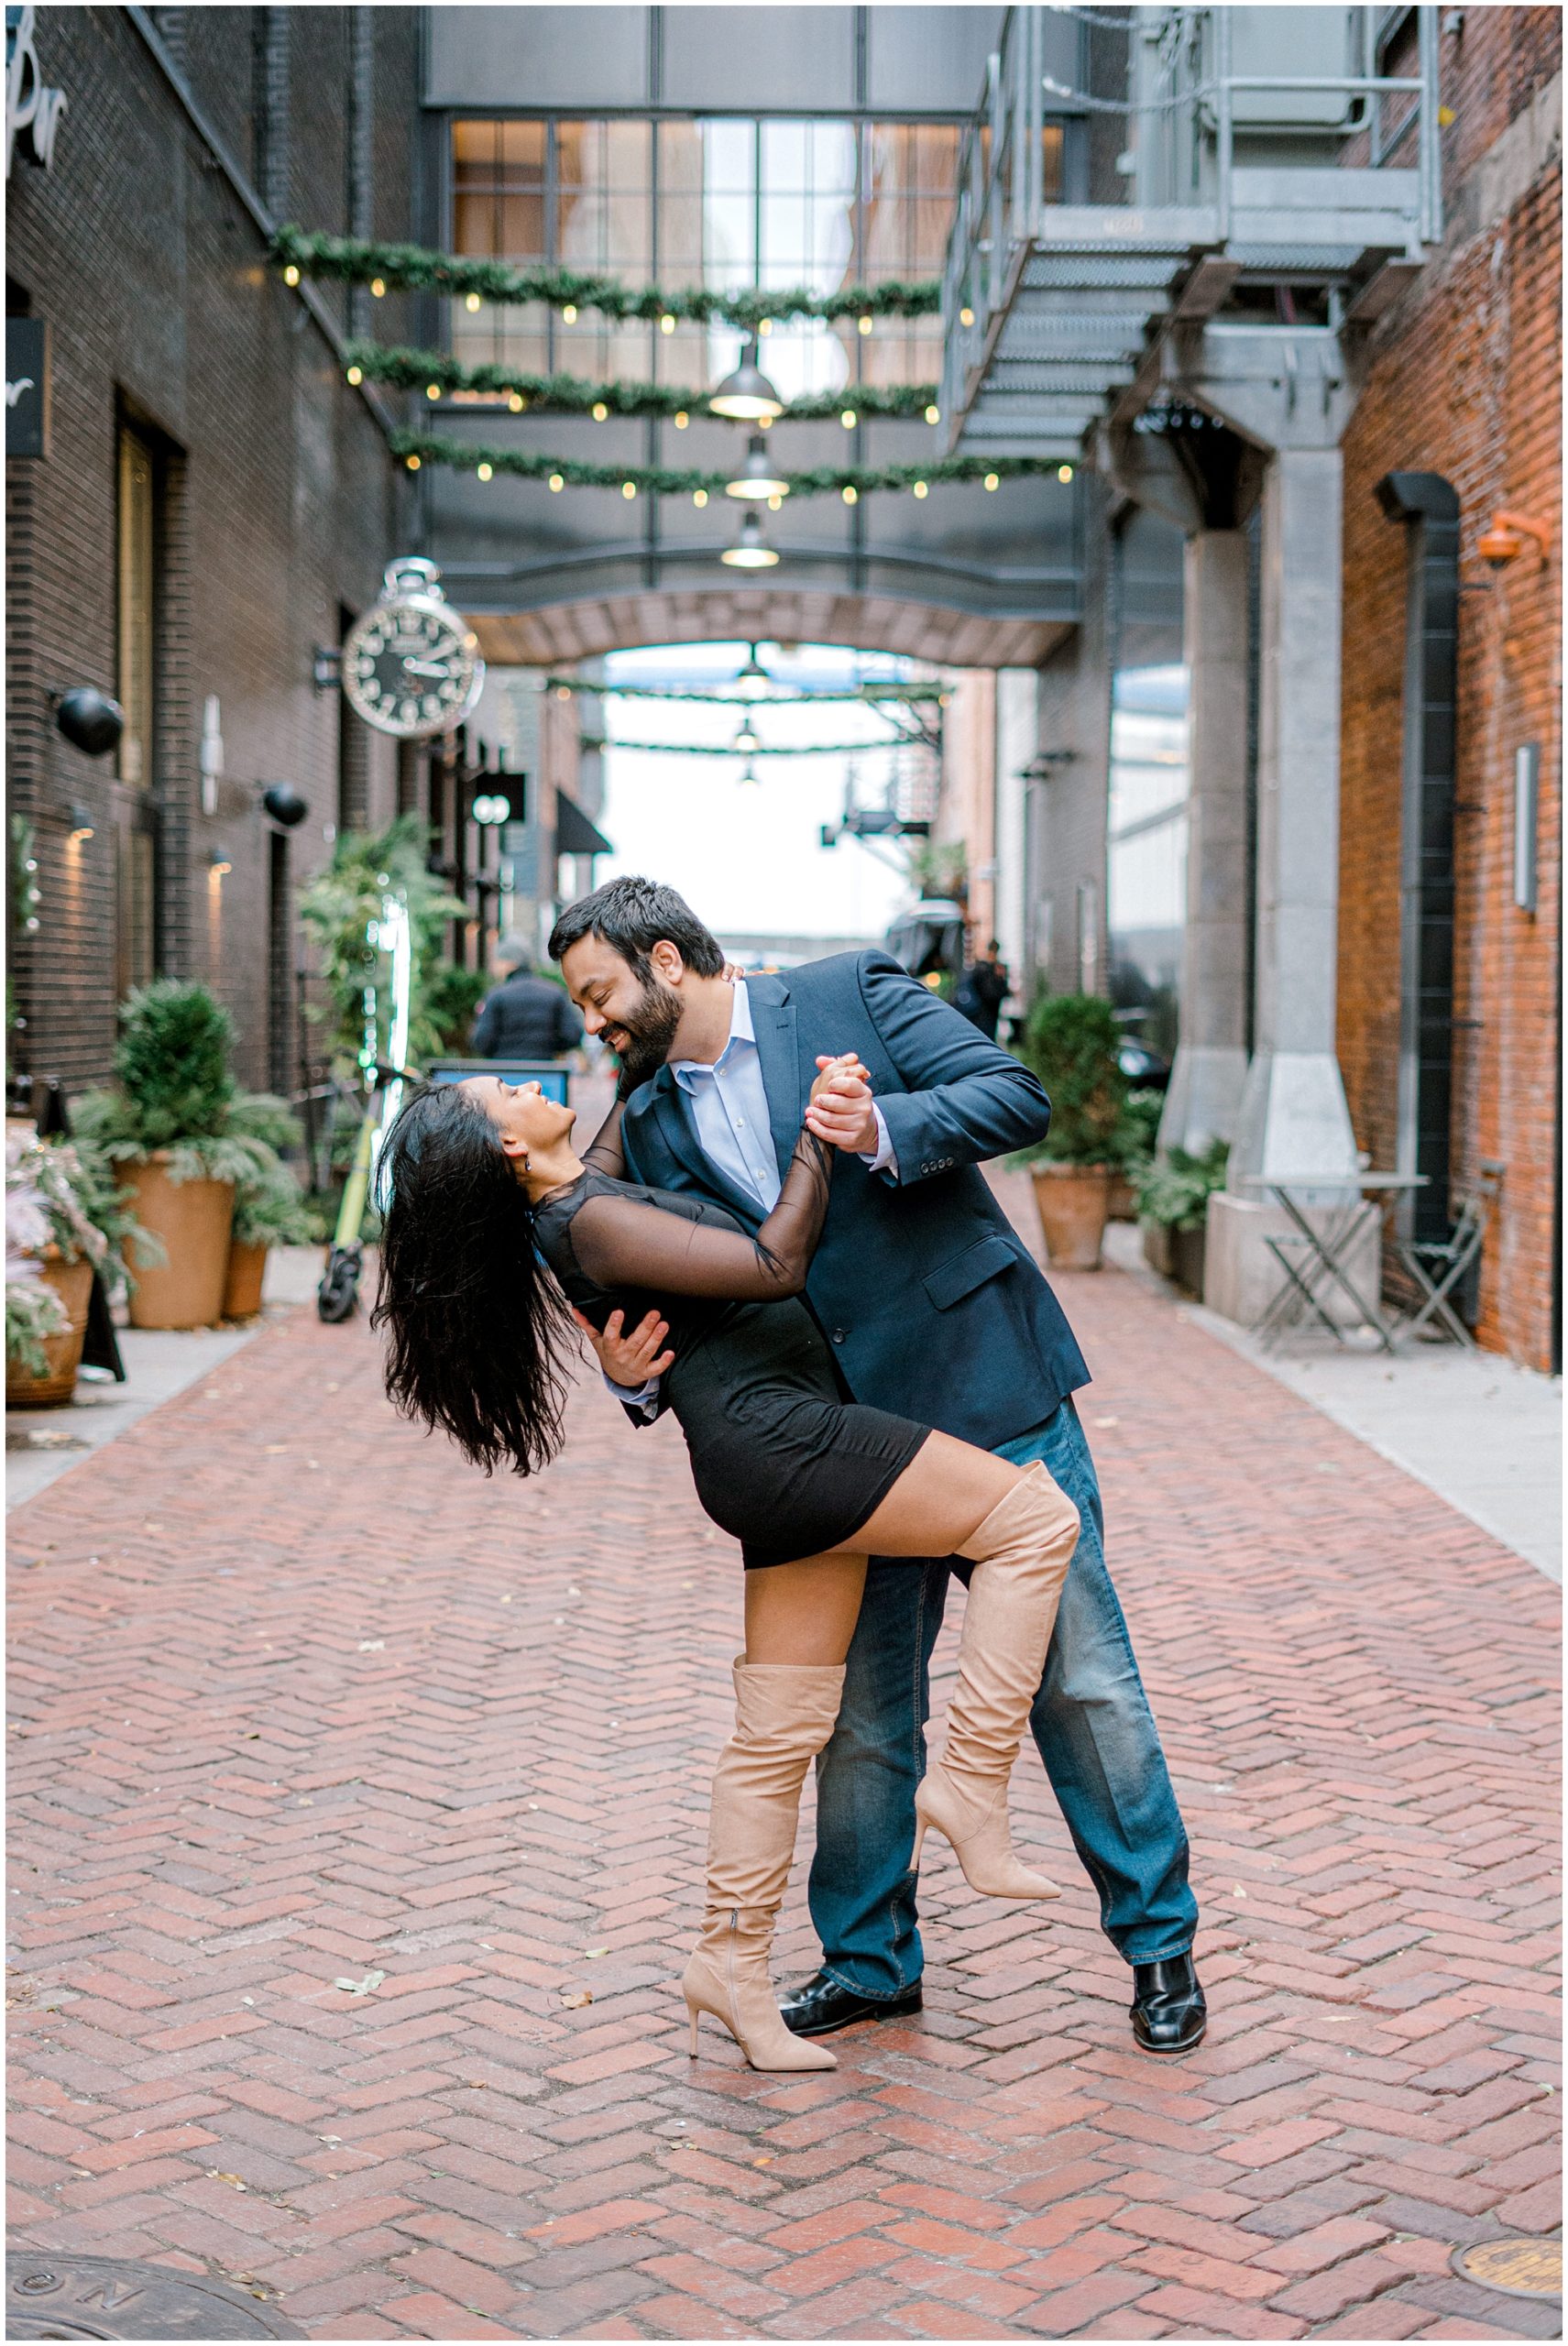 engagement photo poses - the dip